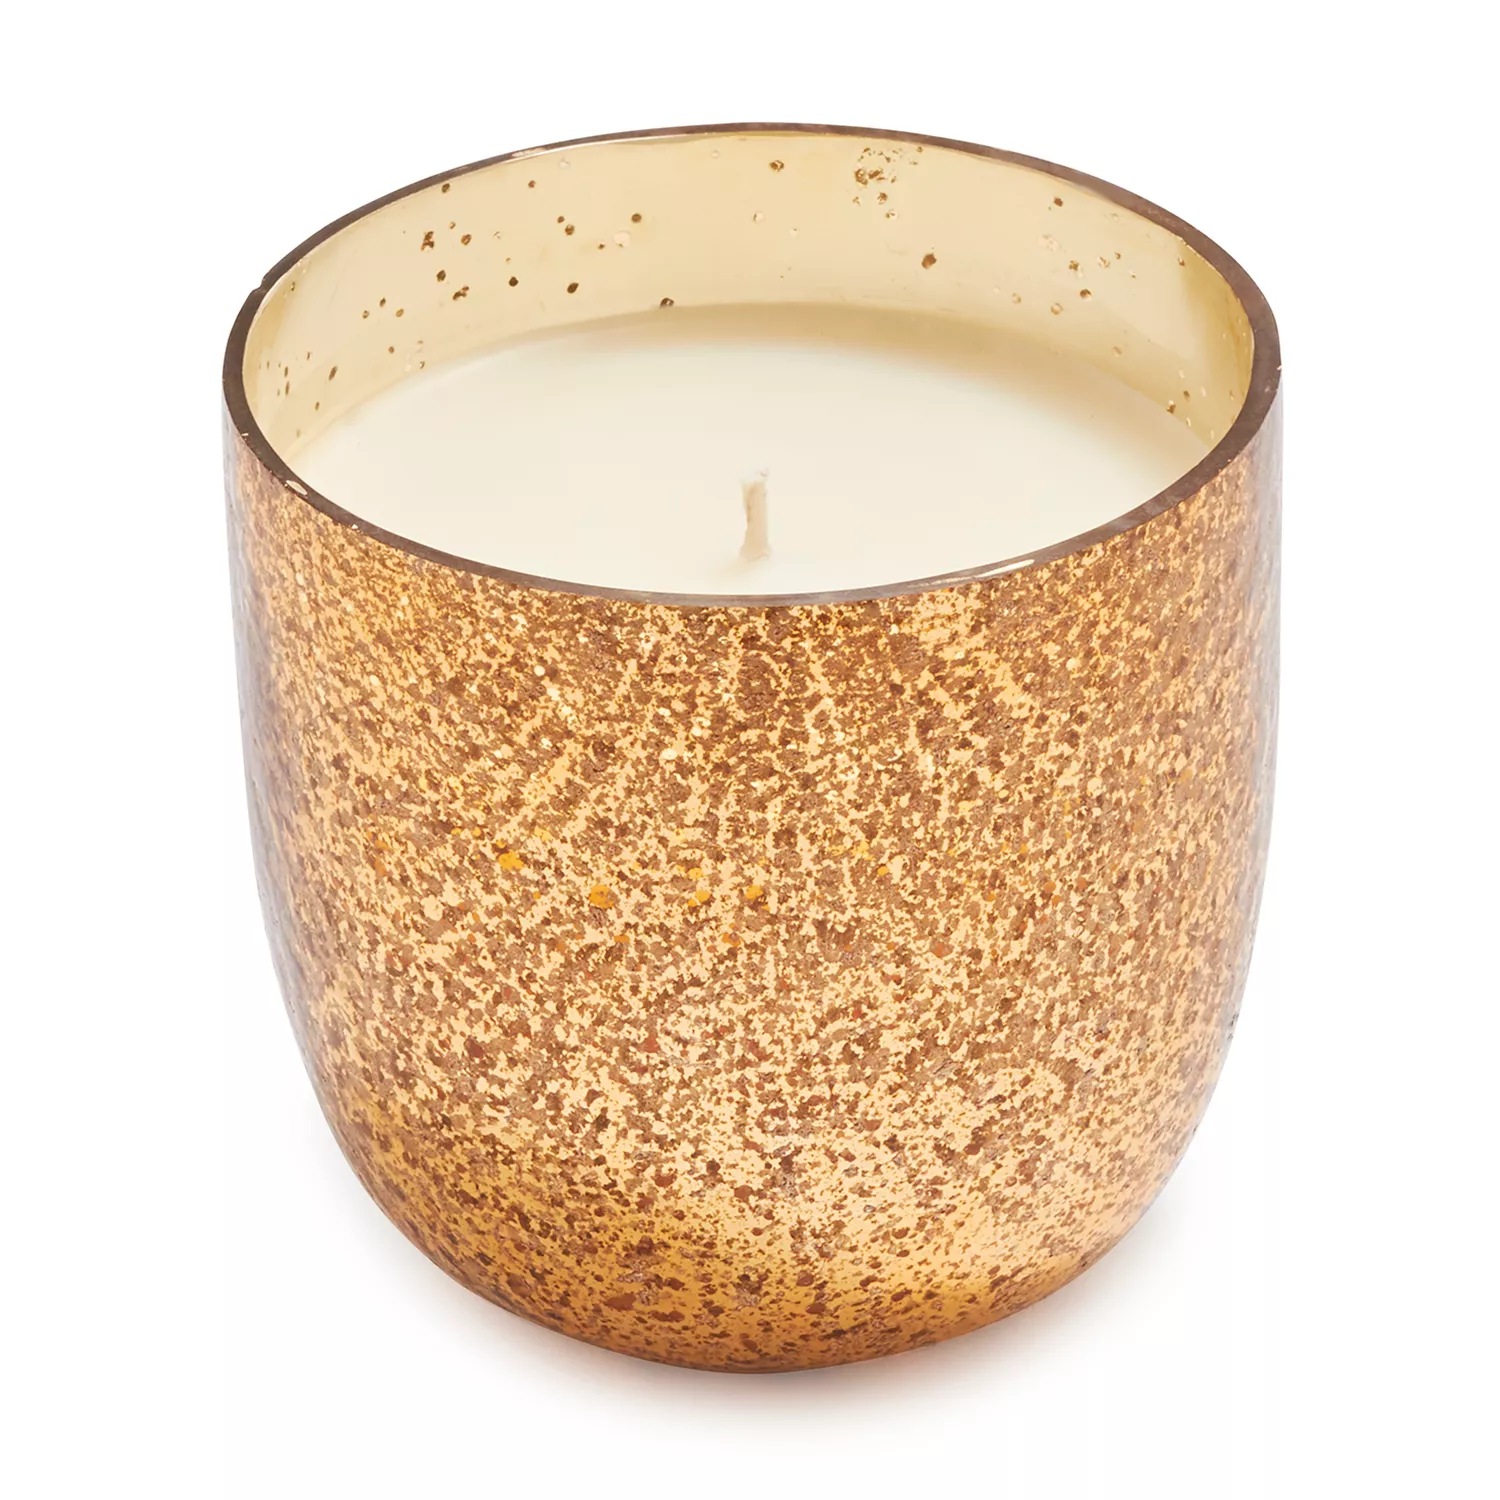 Sur La Table Frosted Gingerbread Mercury Glass Soy Candle, 20 oz.